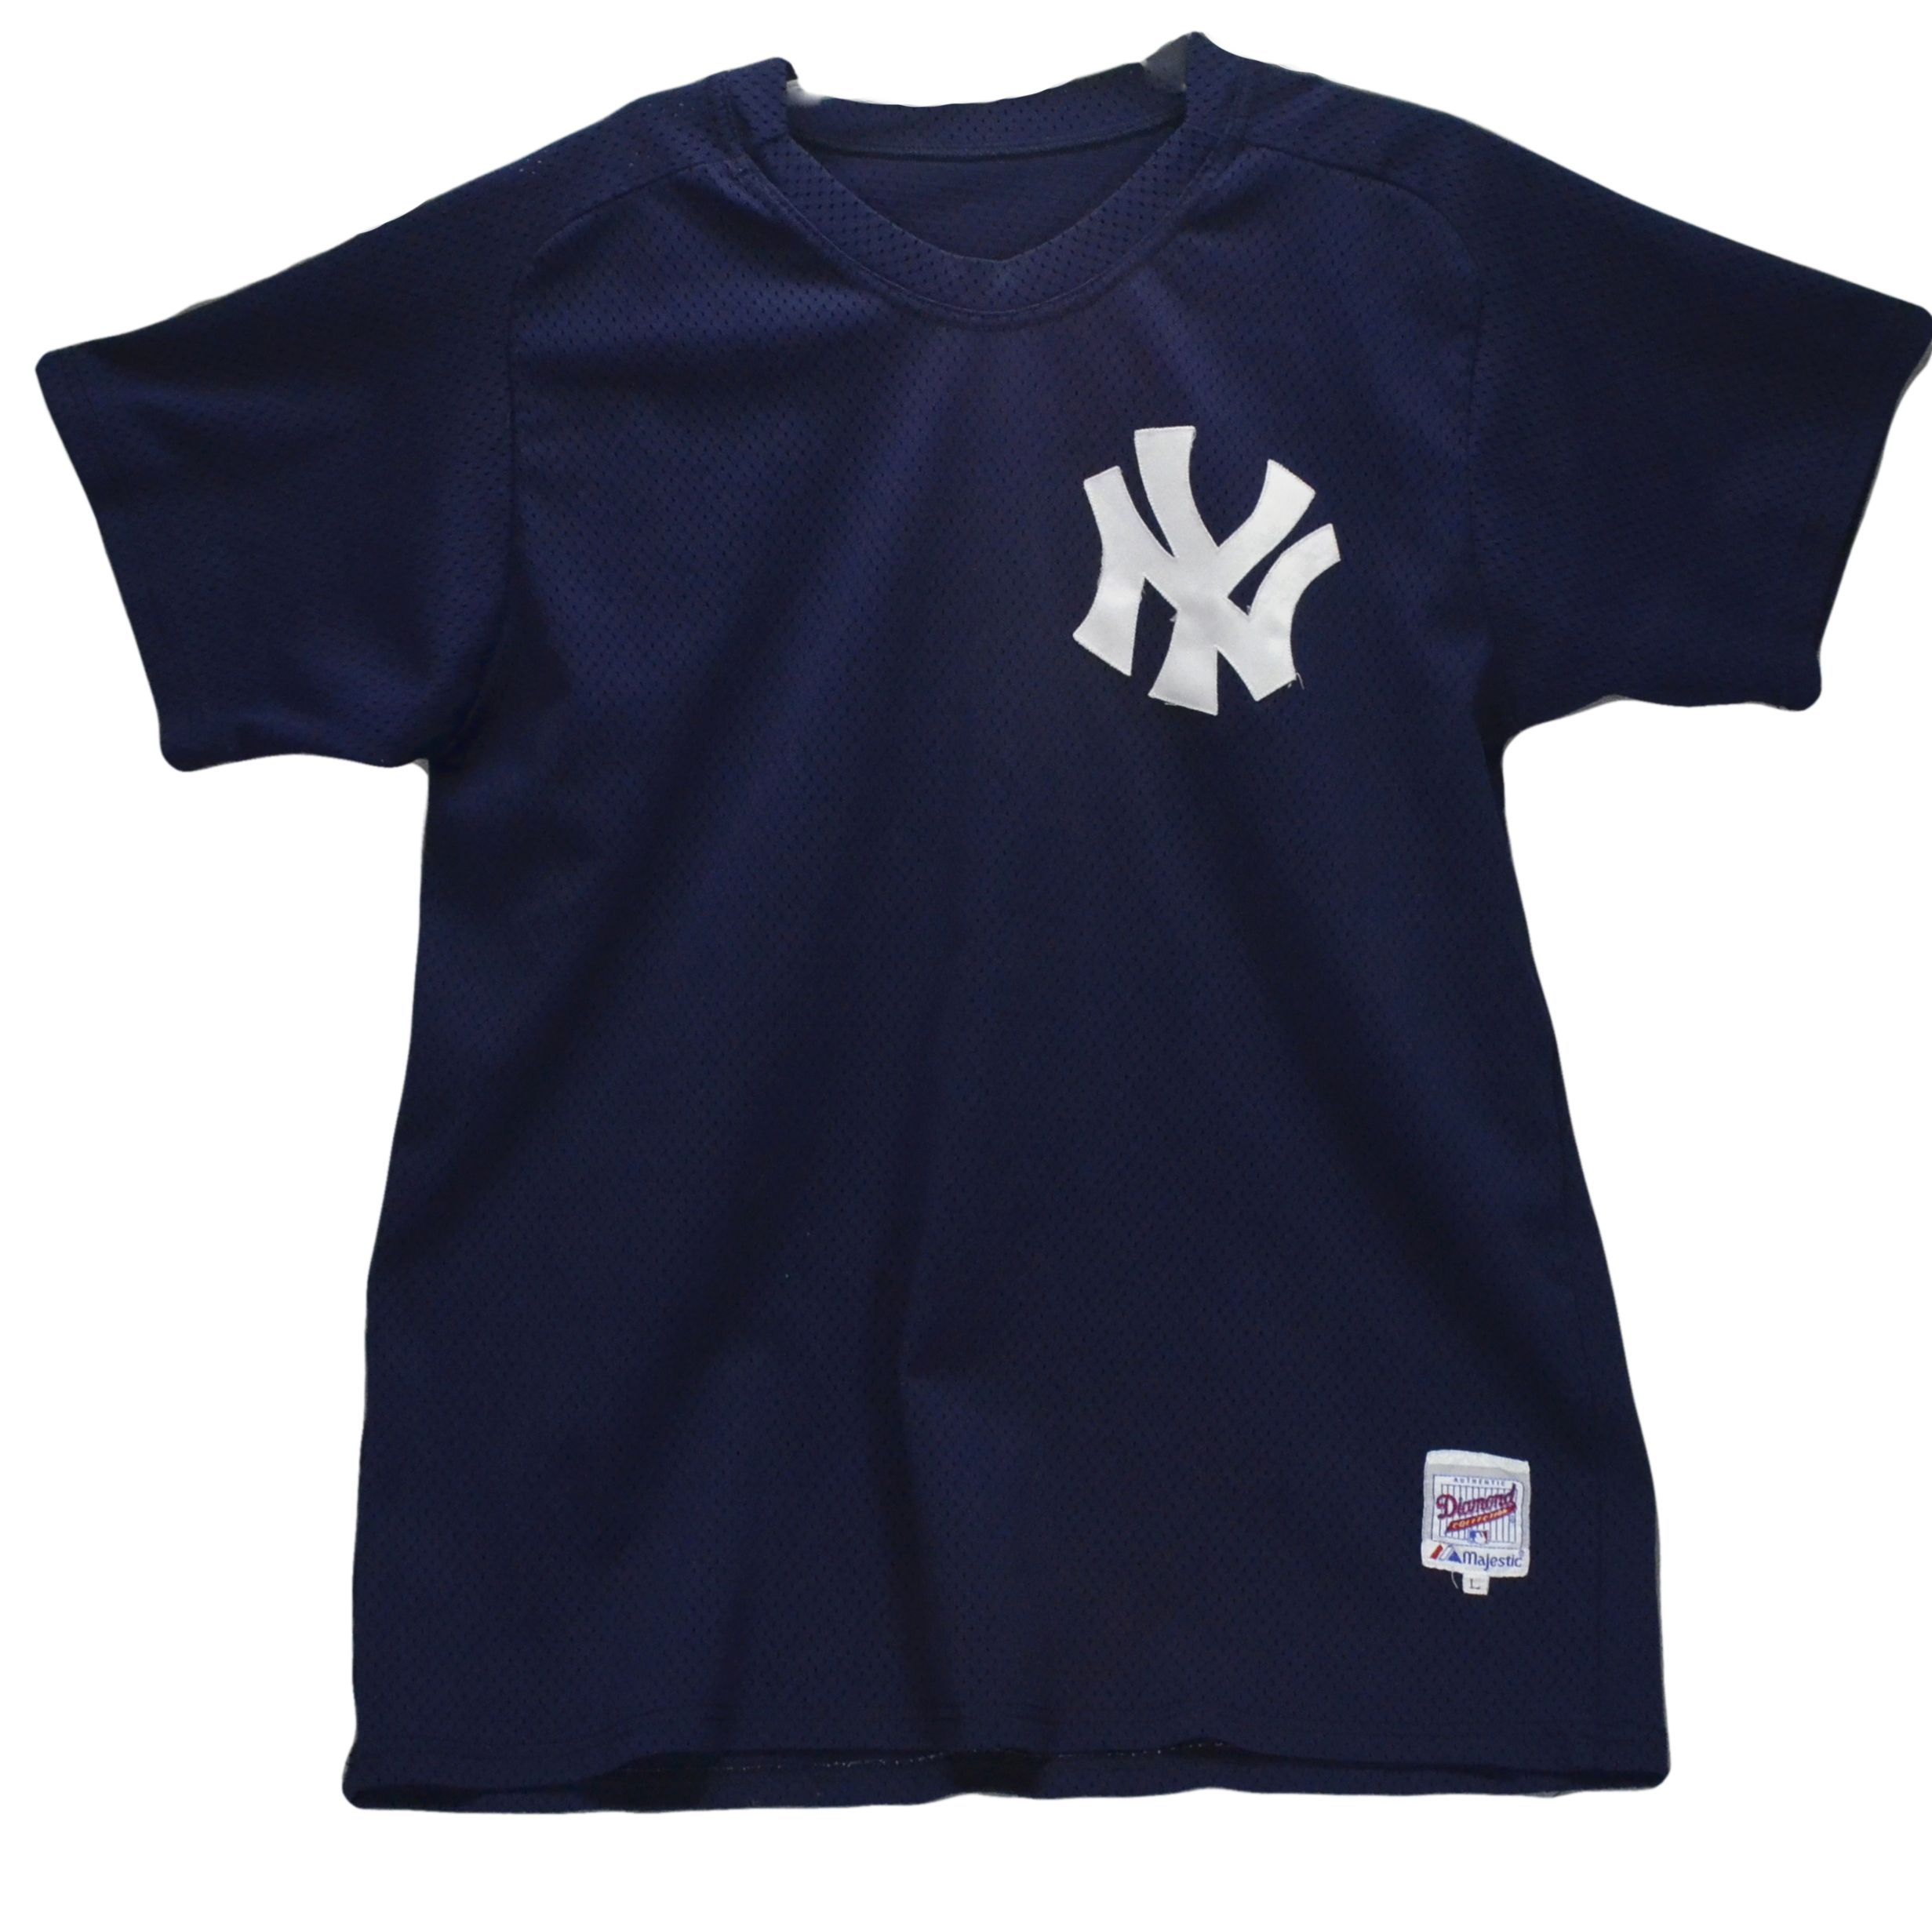 tampa yankees jersey, Off 73%